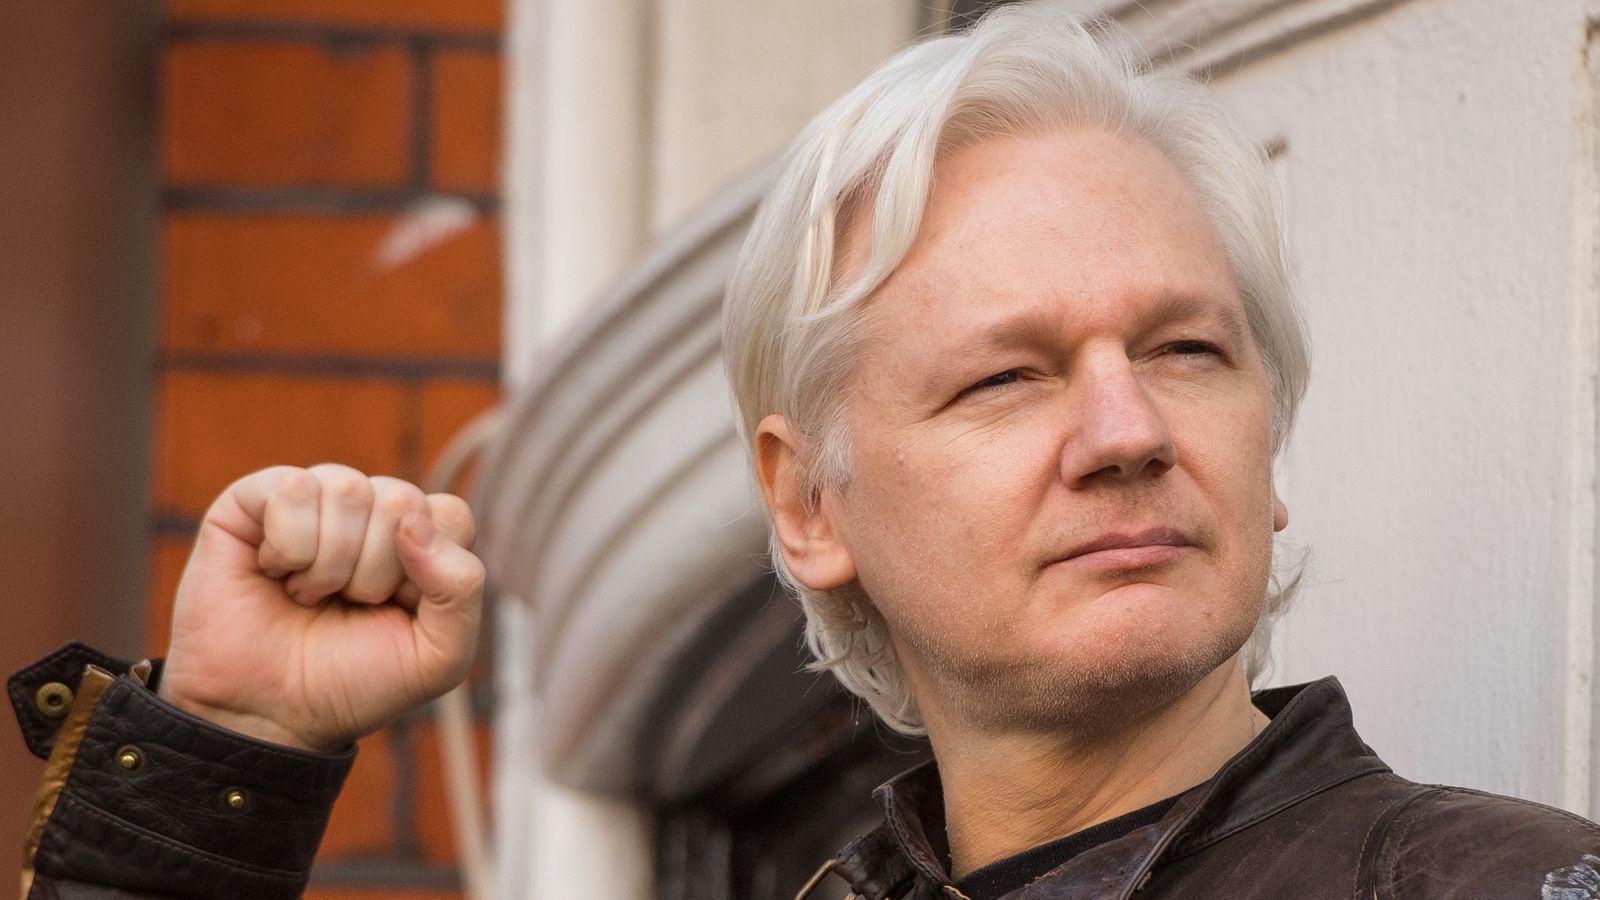 assange's wife accuses us of 'weasel words' after providing assurances in extradition bid